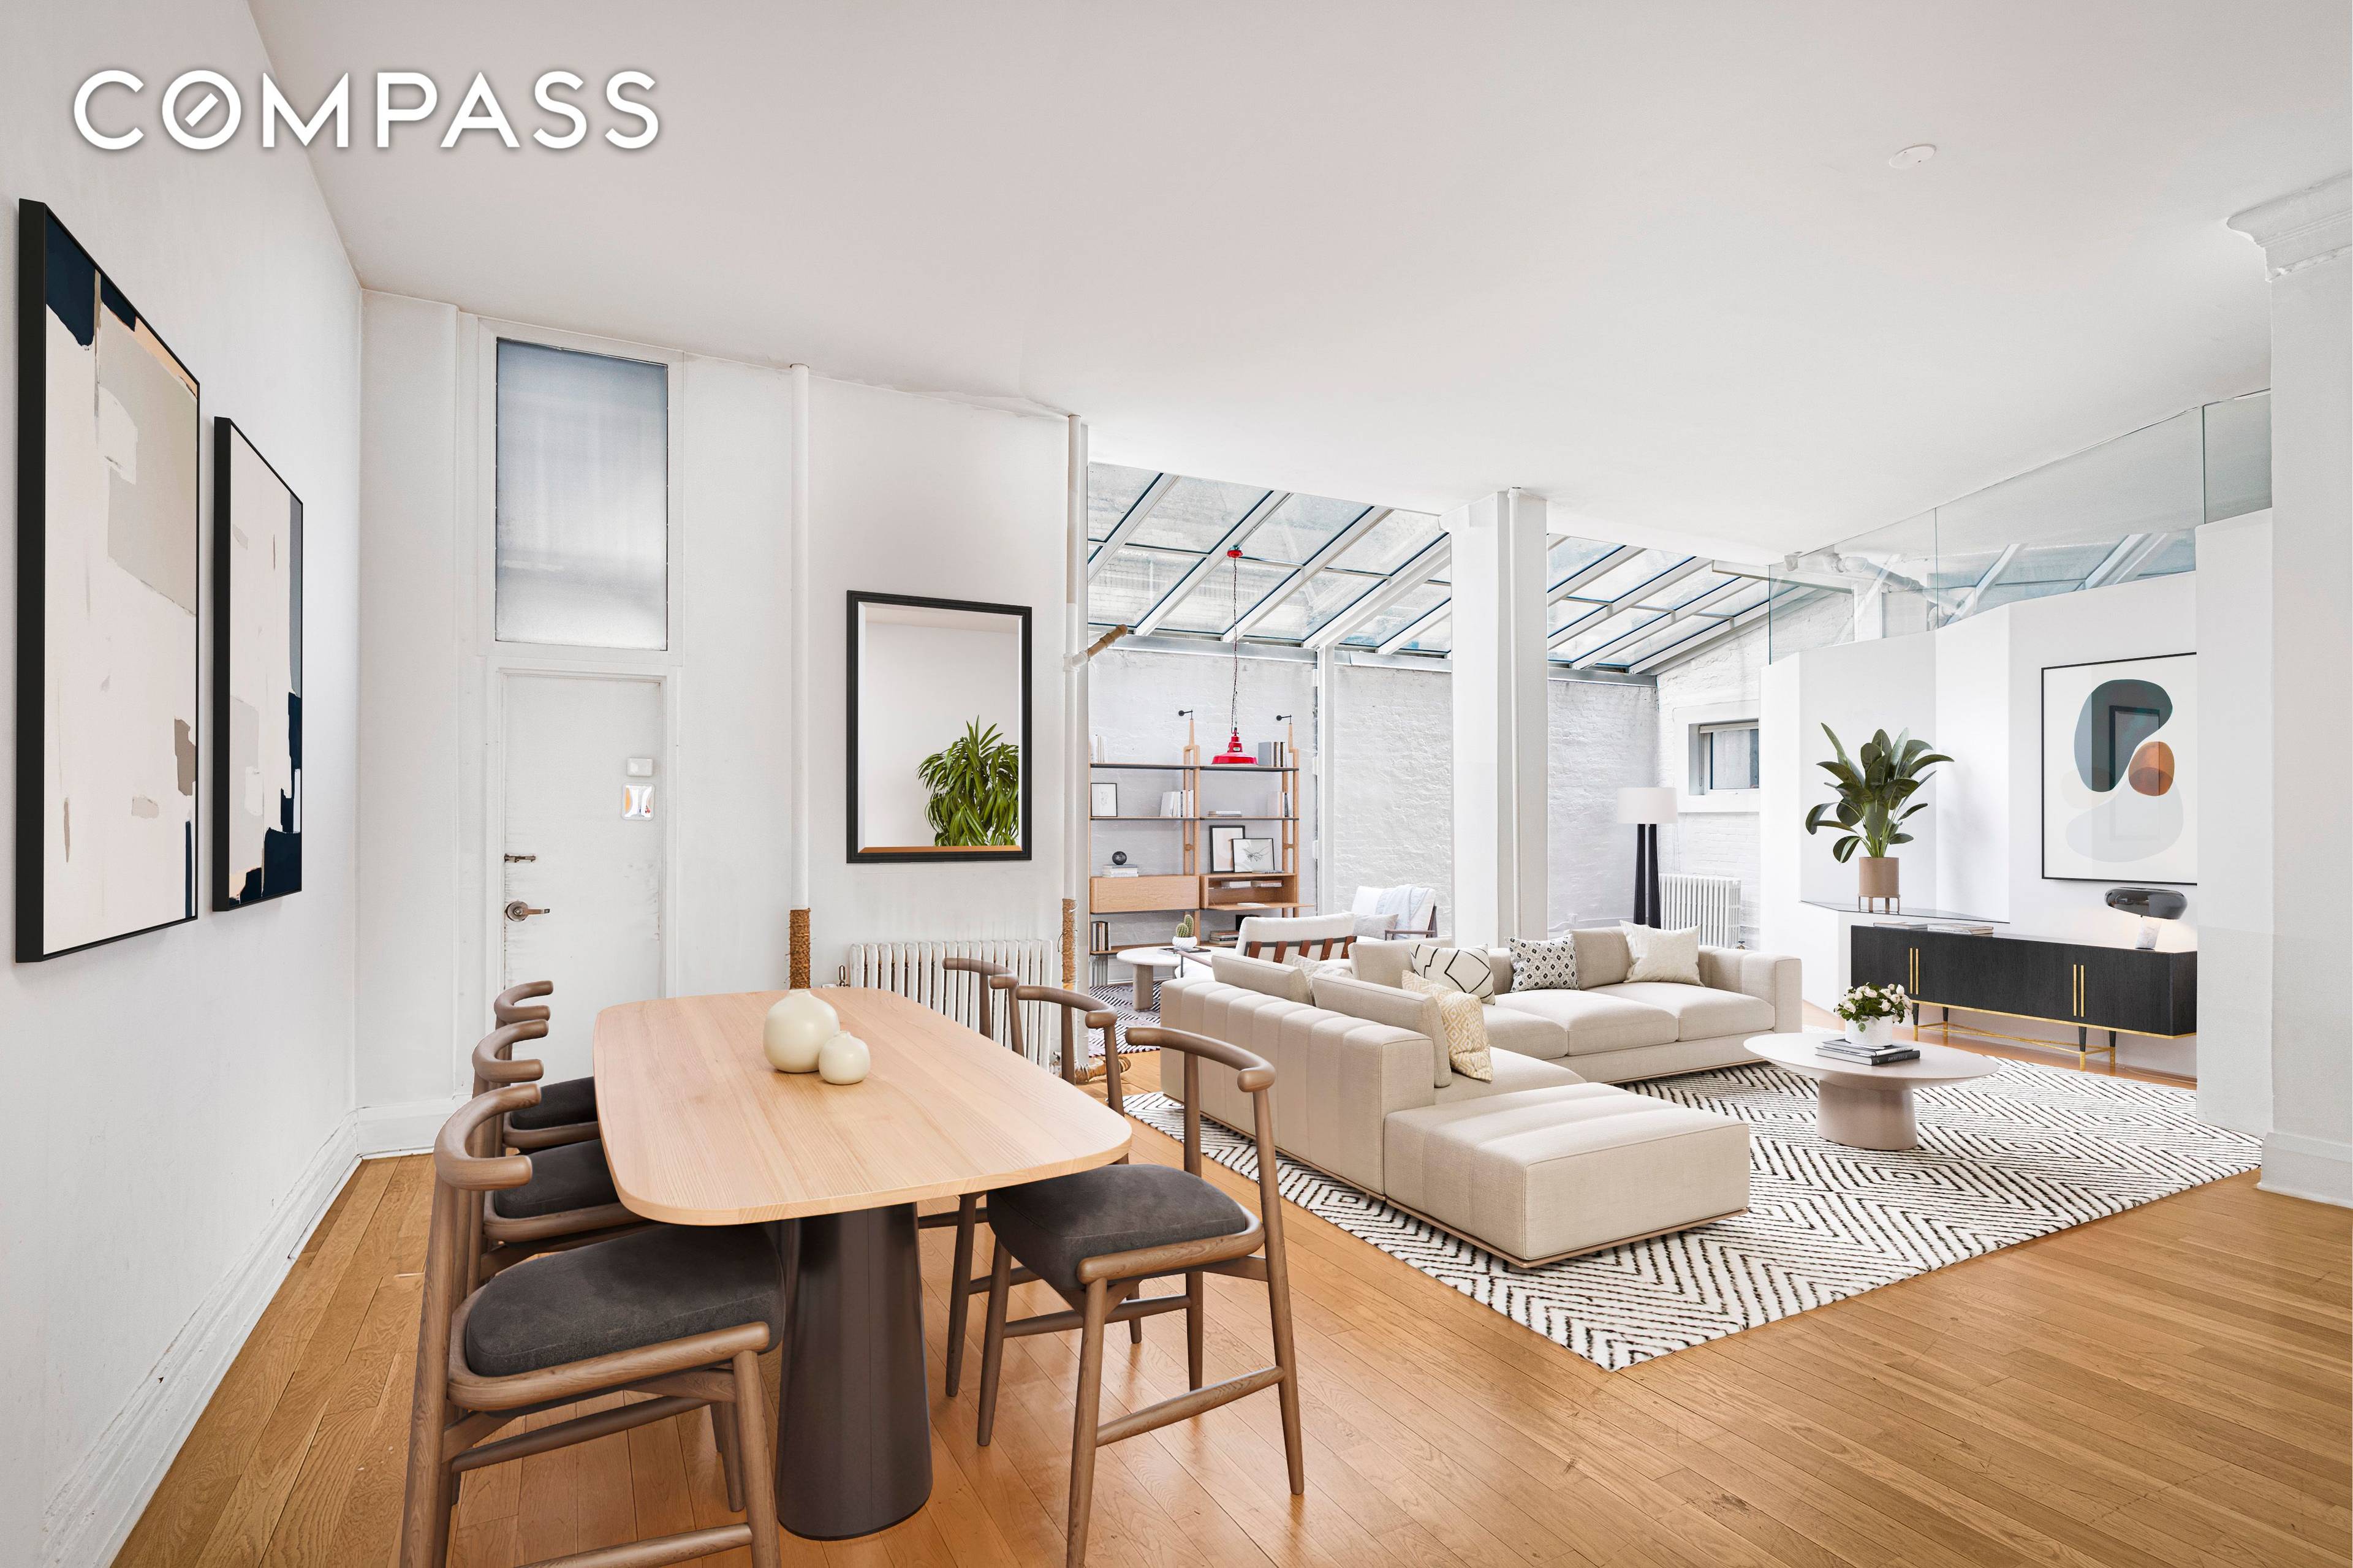 Imagine walking into a 2600 SQ Ft authentic and renovated Chelsea loft through a PRIVATE ENTRANCE off 22nd street.